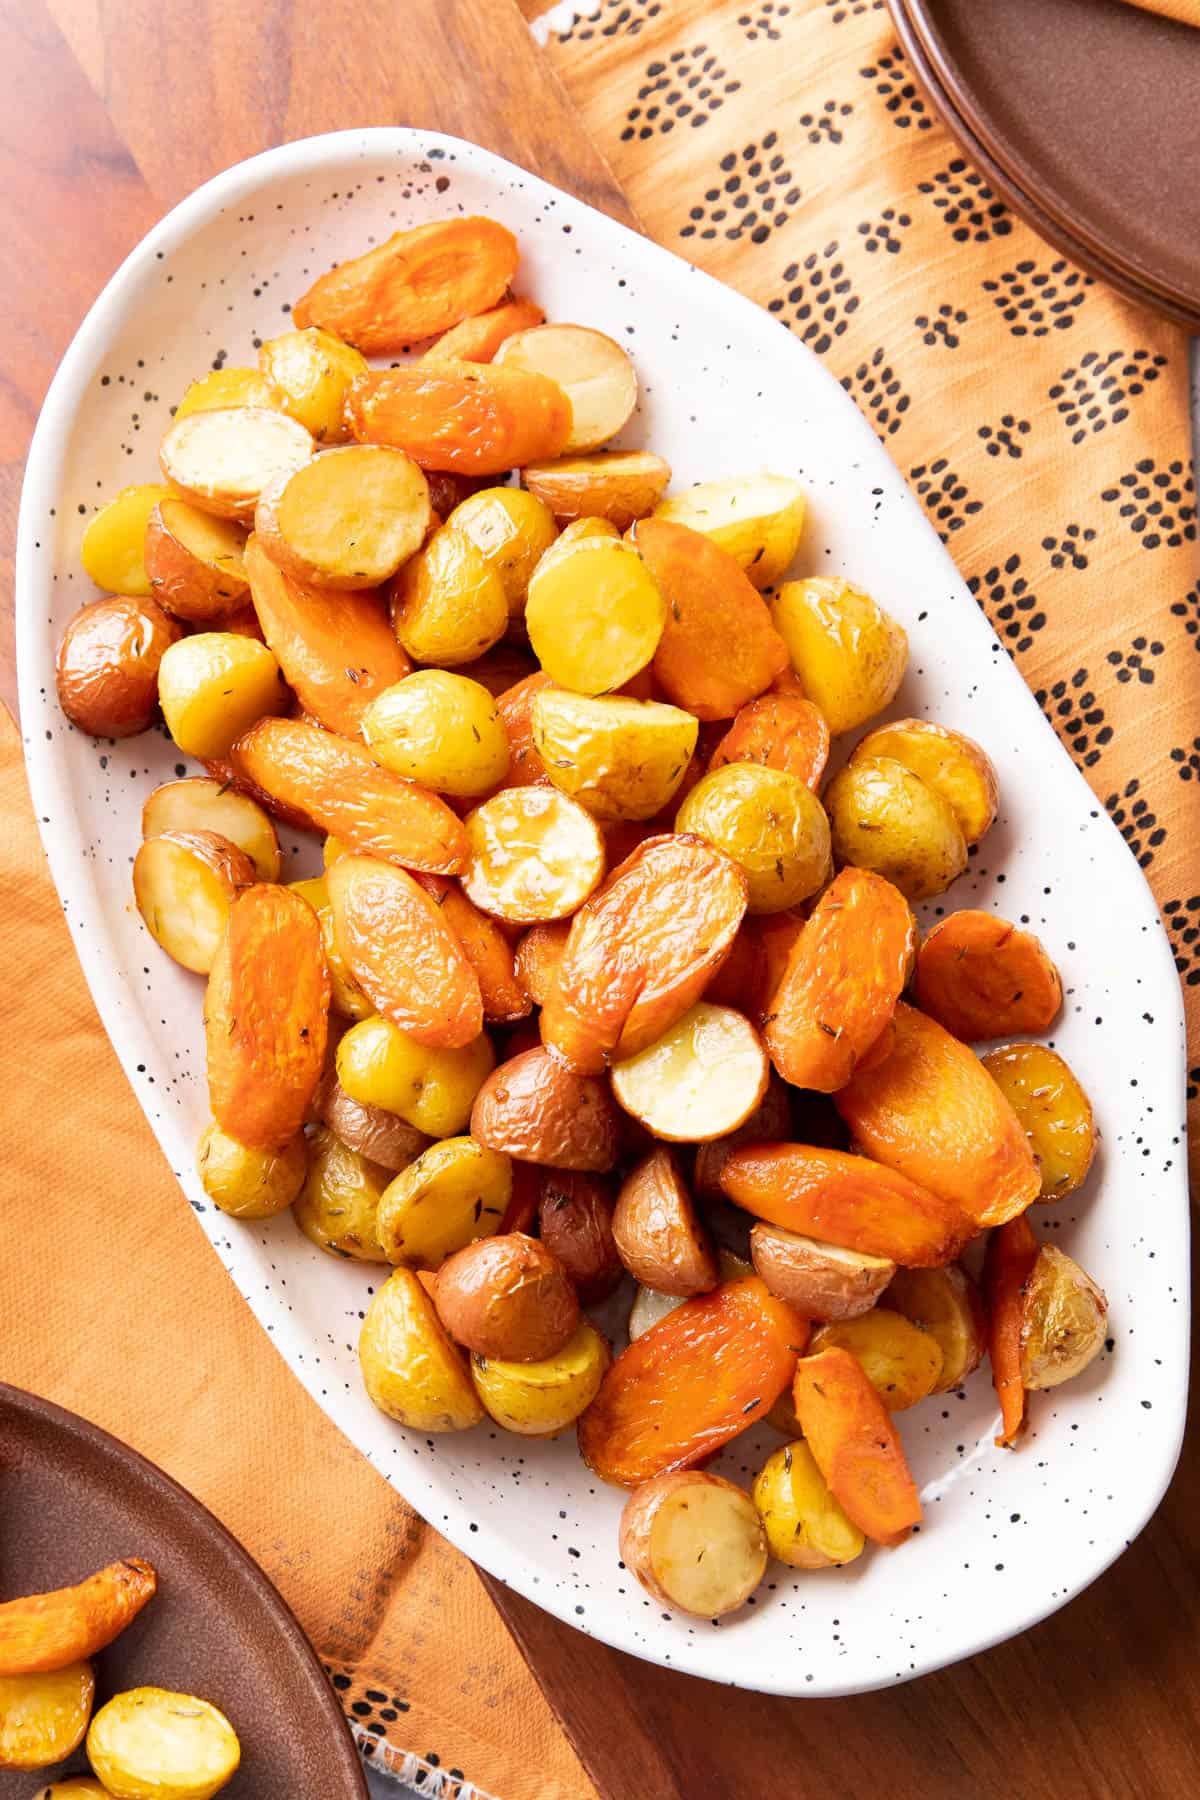 Serving dish of roasted potatoes and carrots